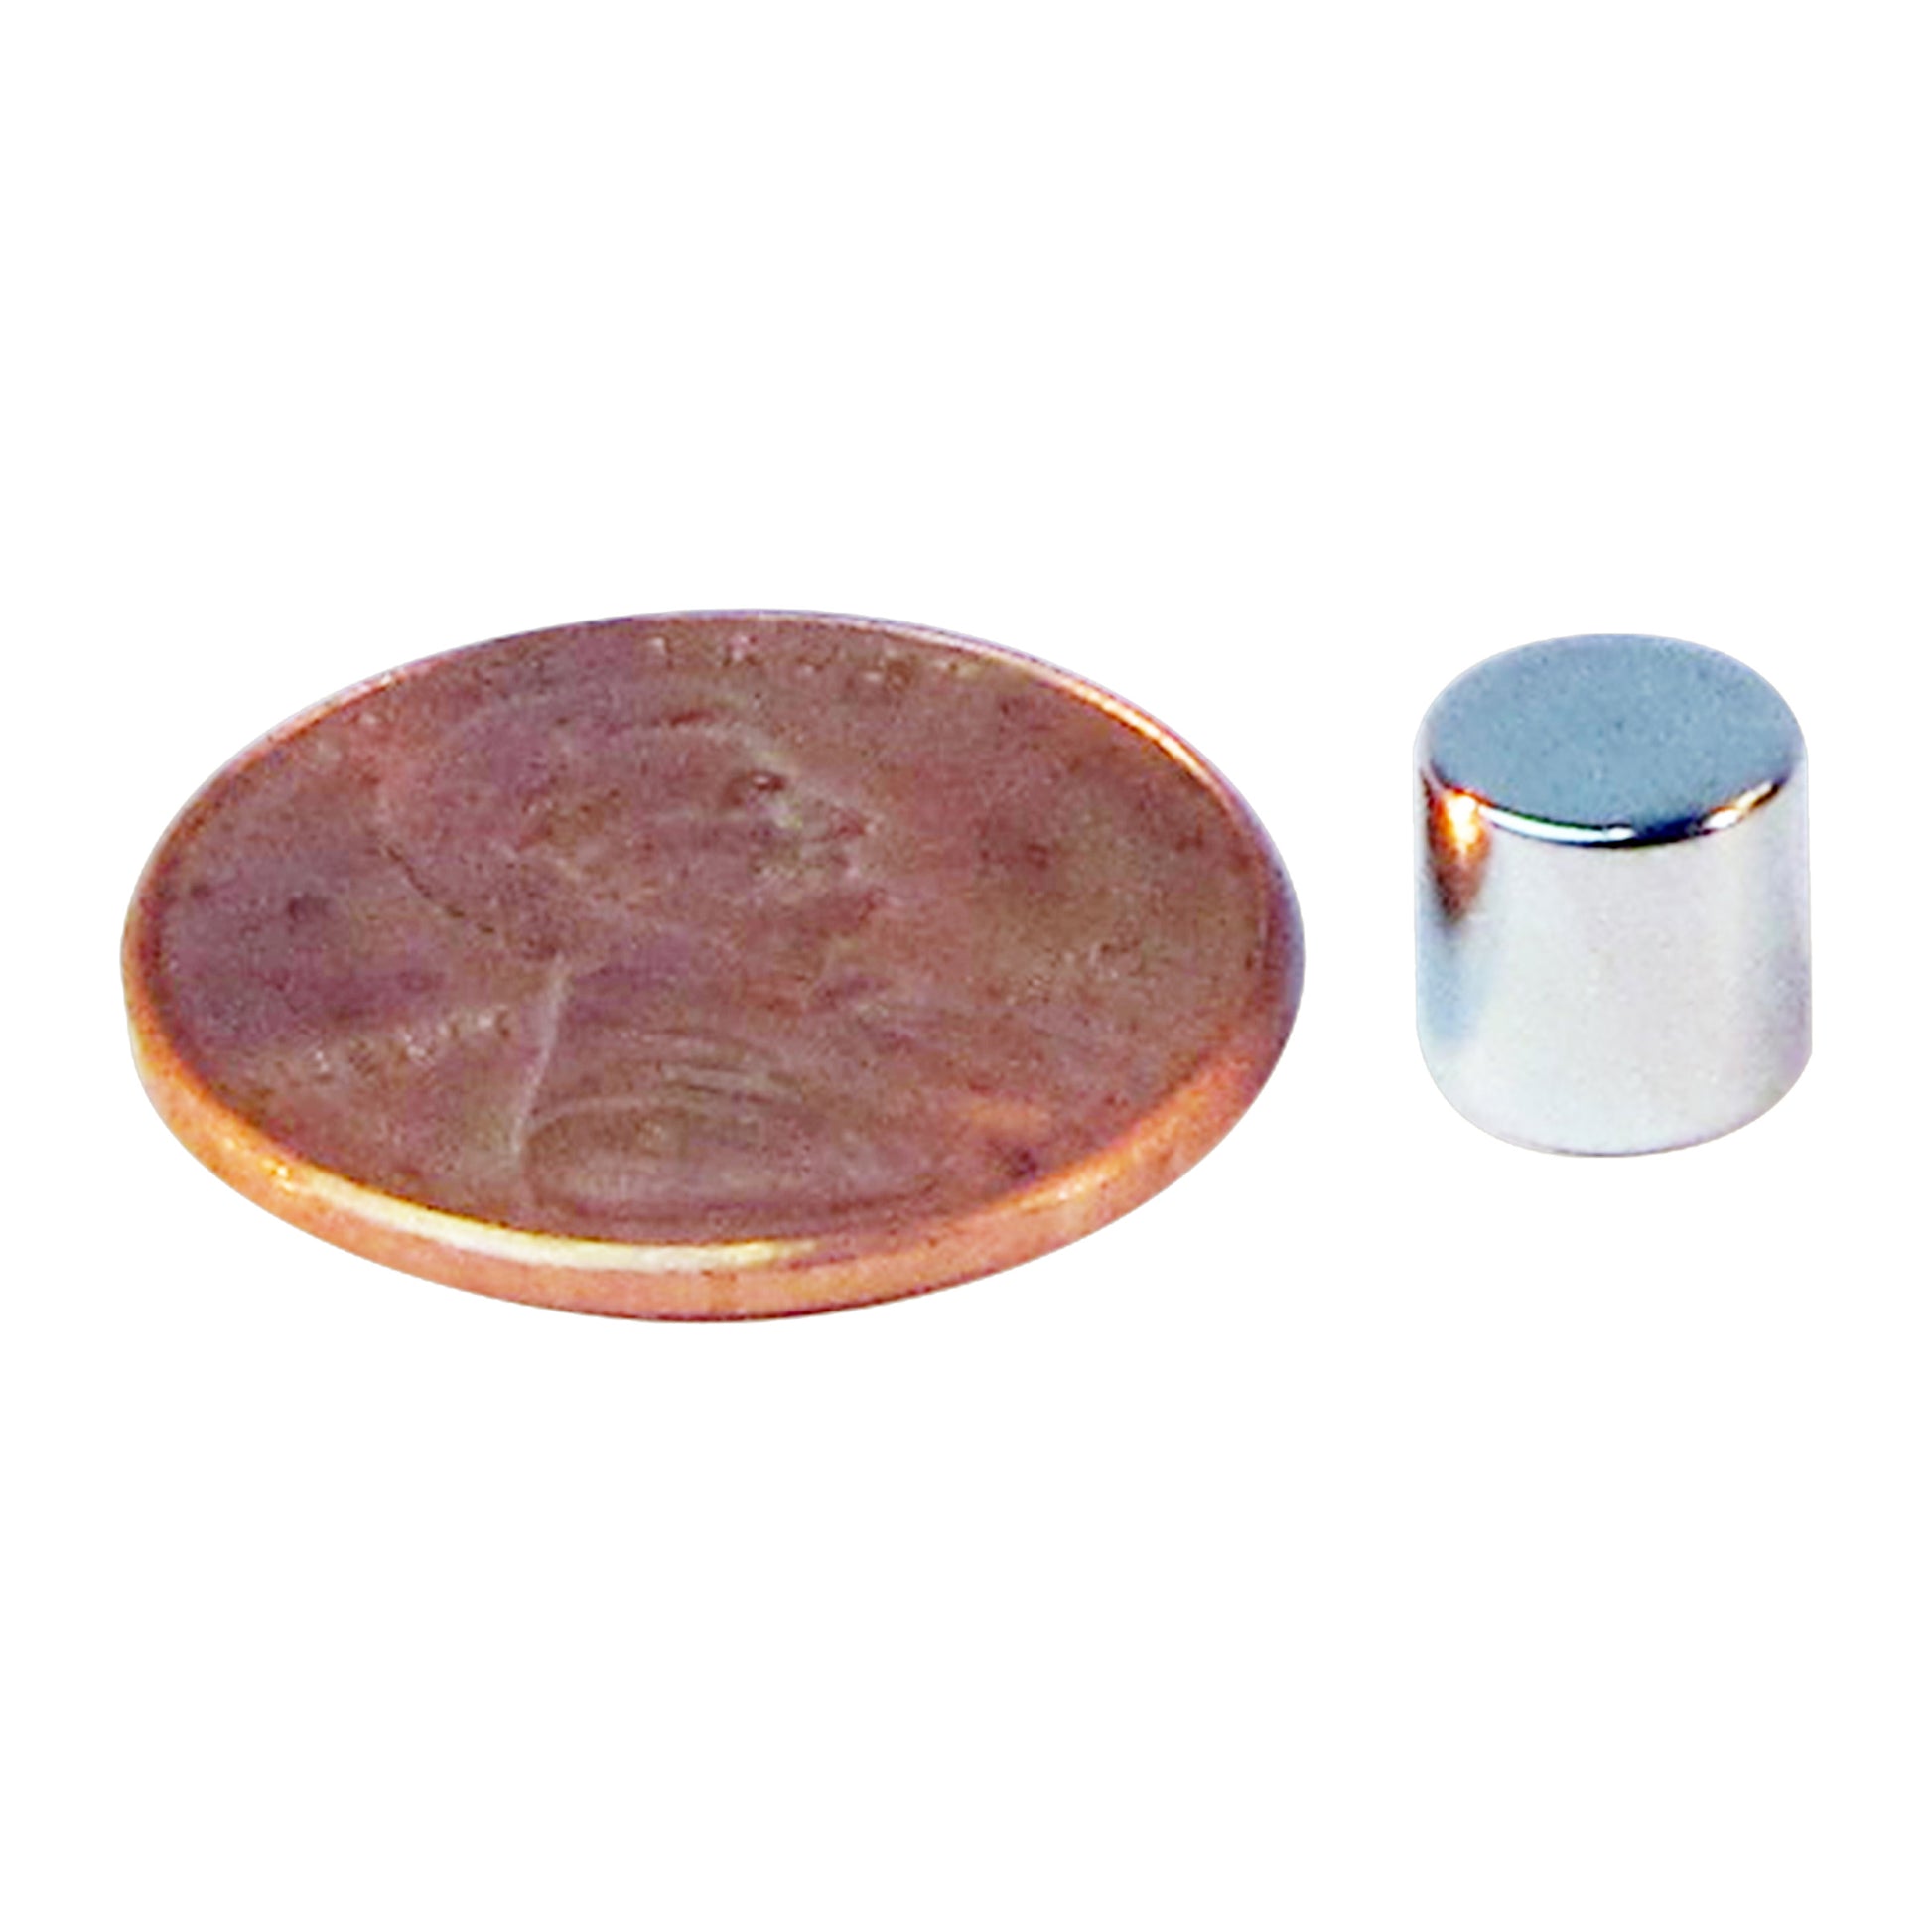 Load image into Gallery viewer, ND283N-35 Neodymium Disc Magnet - Compared to Penny for Size Reference